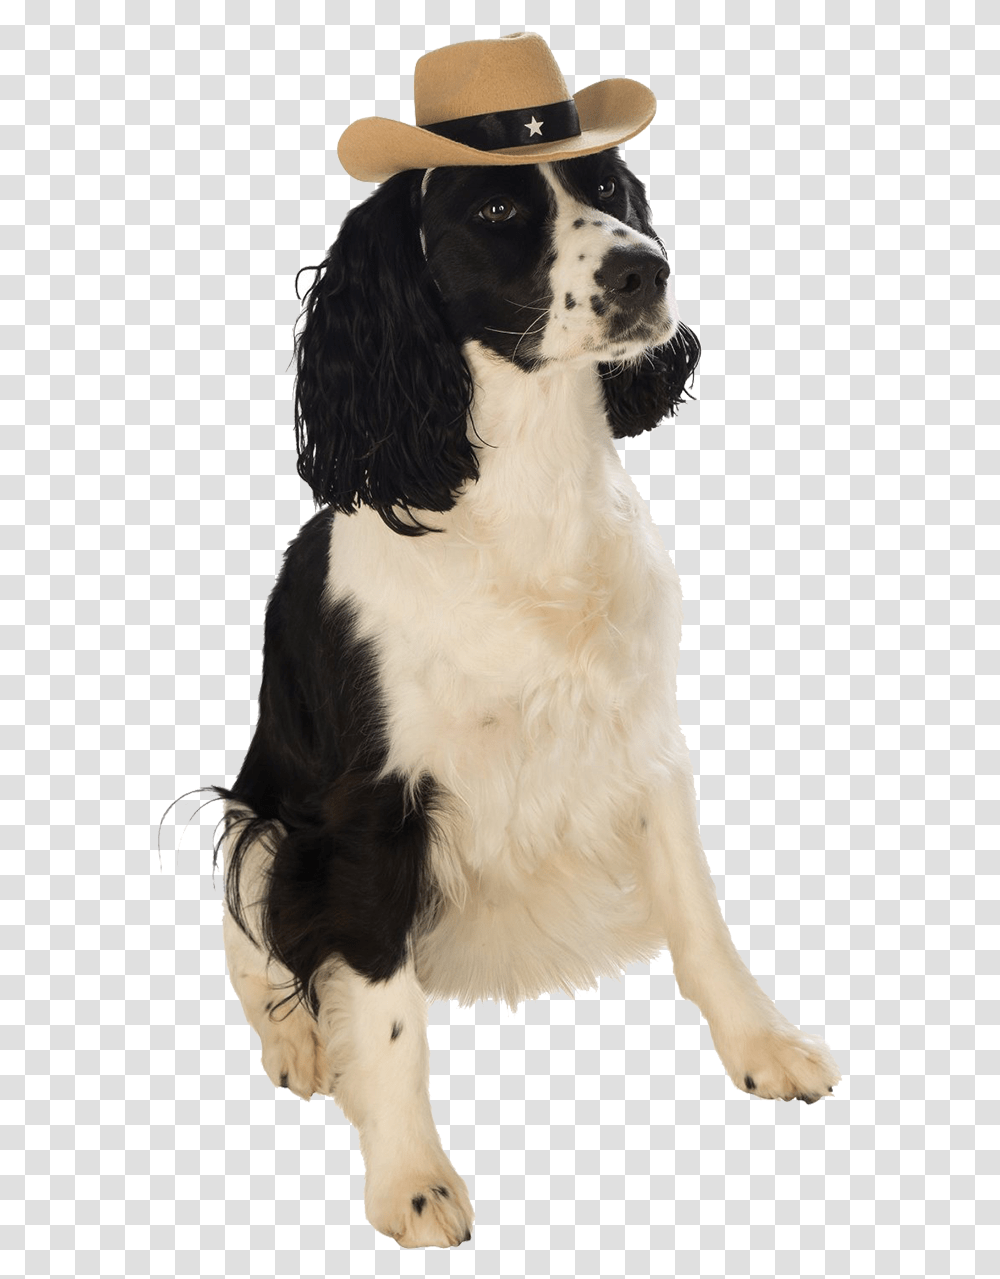 Dog With Cowboy Hat, Pet, Canine, Animal, Mammal Transparent Png